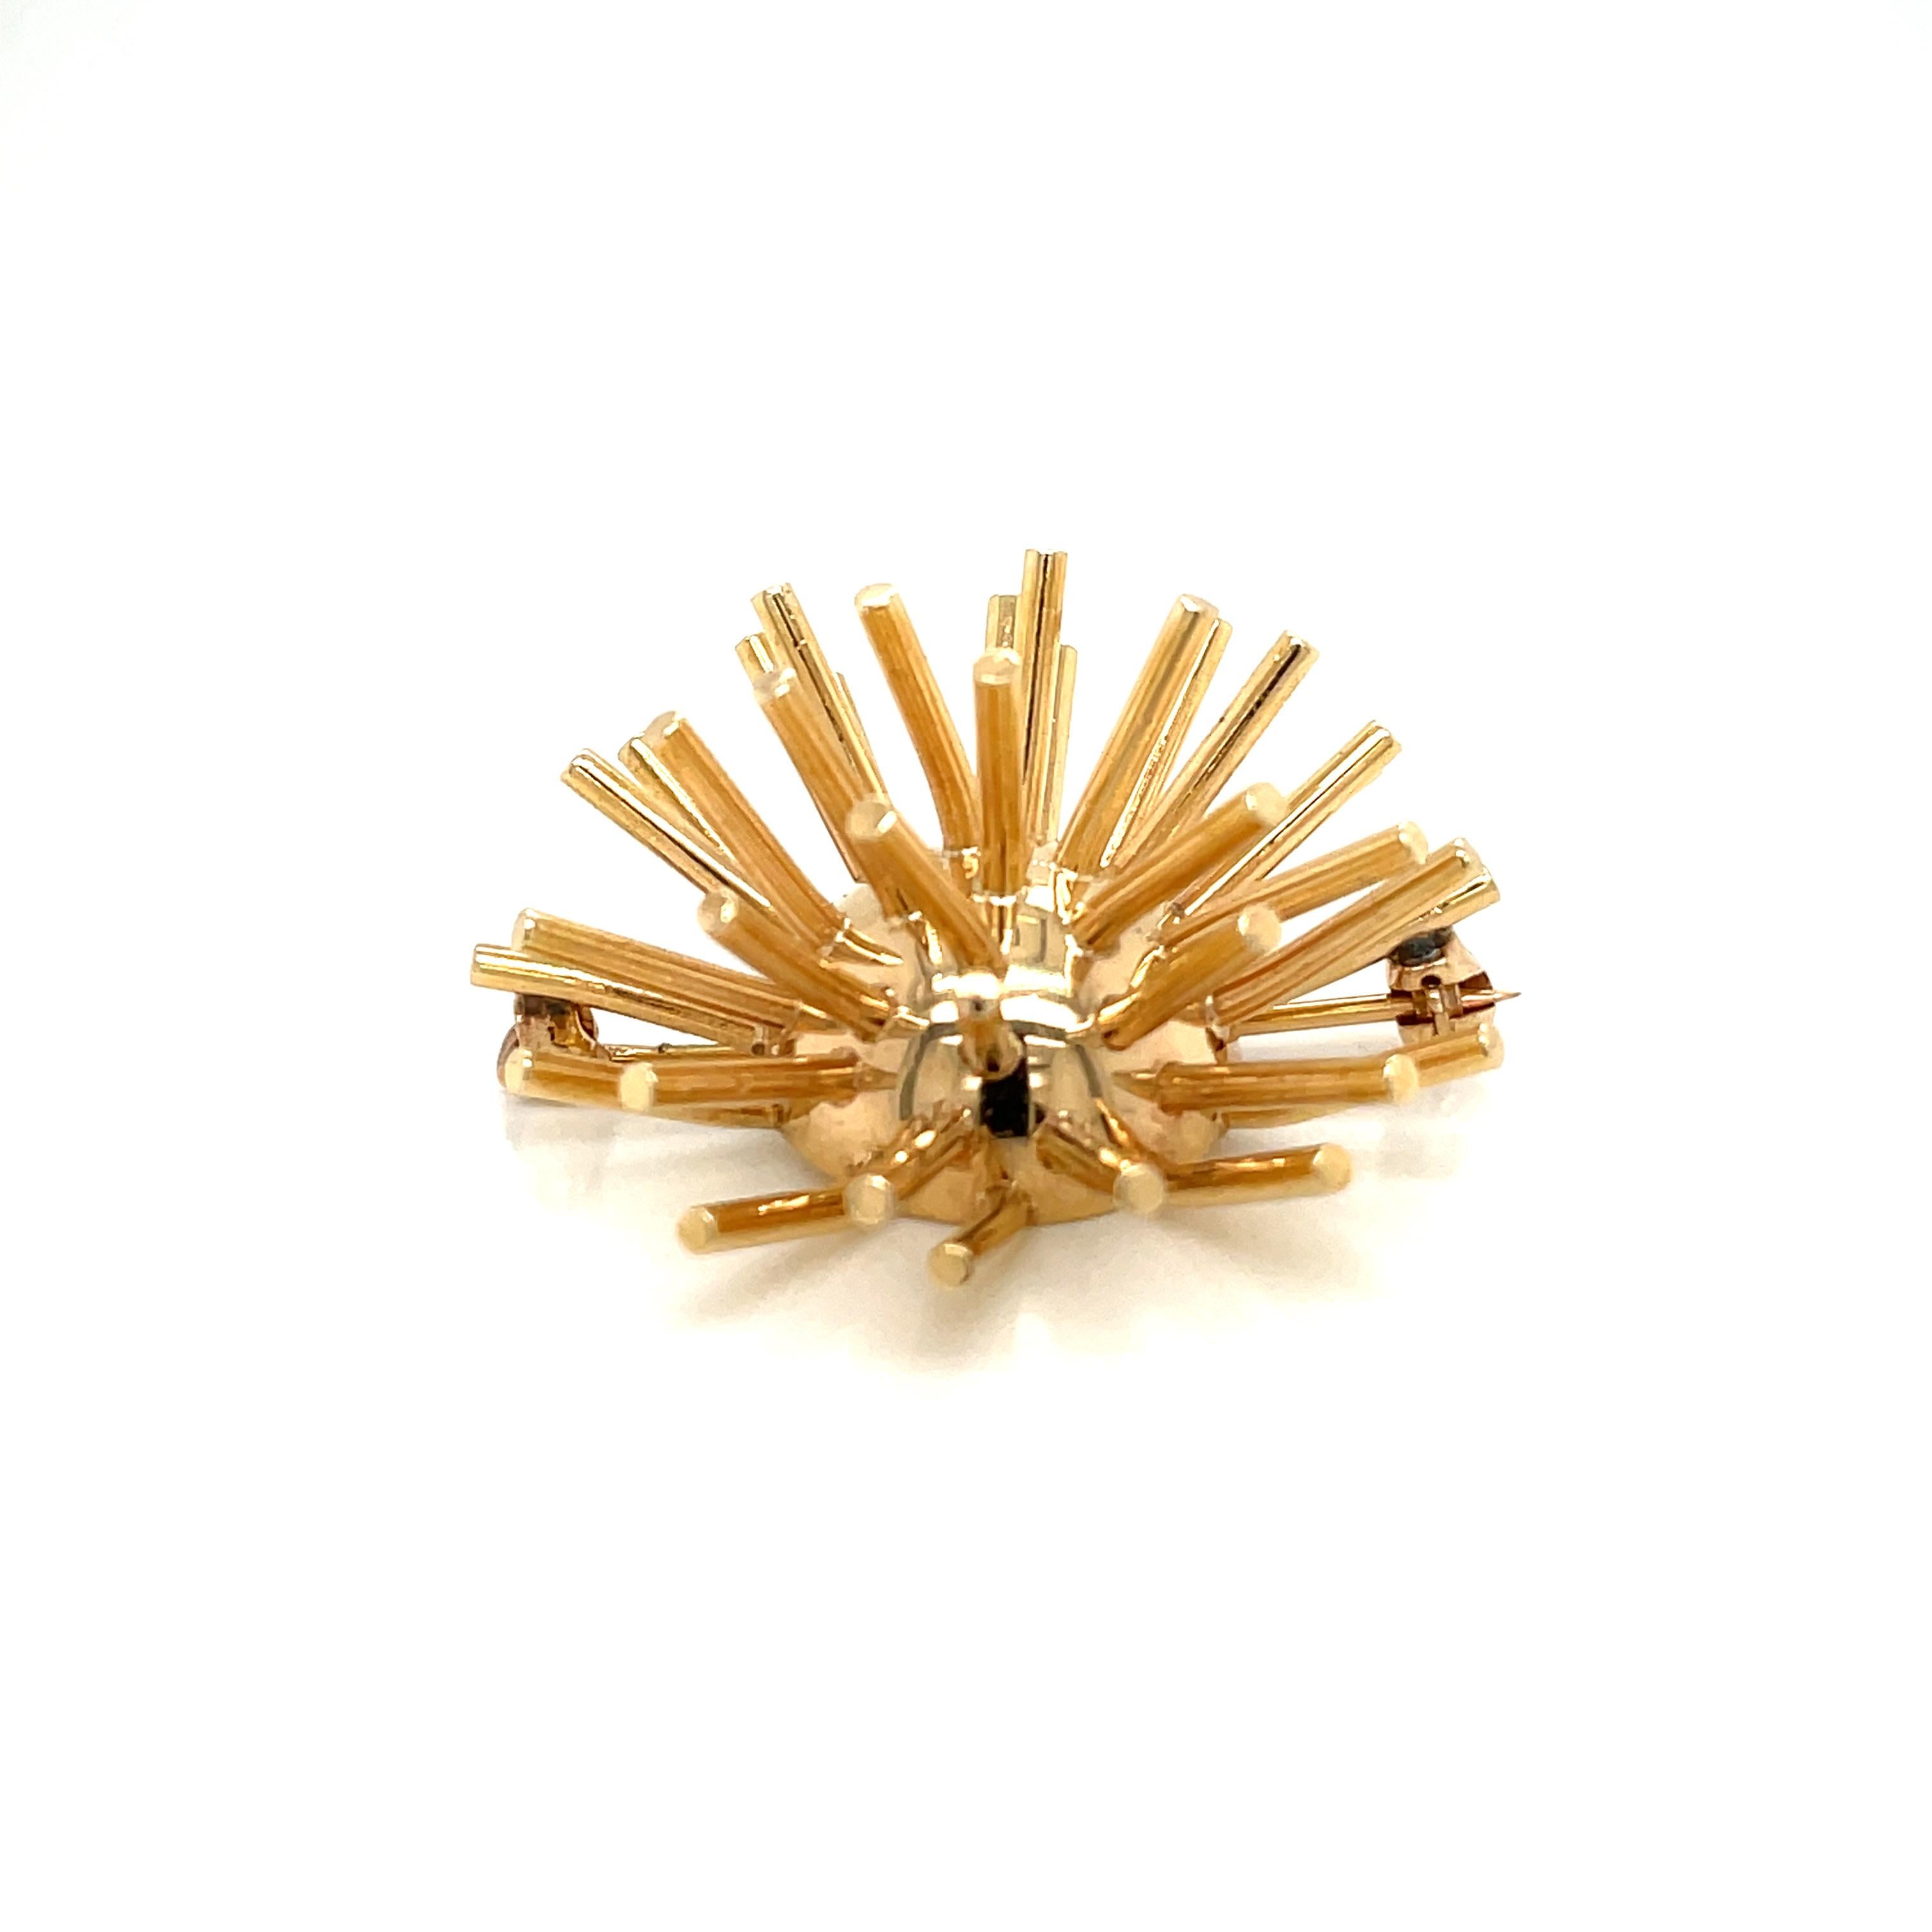 Rare Gold Pin made by Cartier from the Sputnik collection, the smart dimensions and contemporary design make it an essential for everyday wear or special occasions.
Circa 1960'

Metal: 14k yellow gold
Size/Dimensions: 3,5 cm x 3,5 cm
Signature: